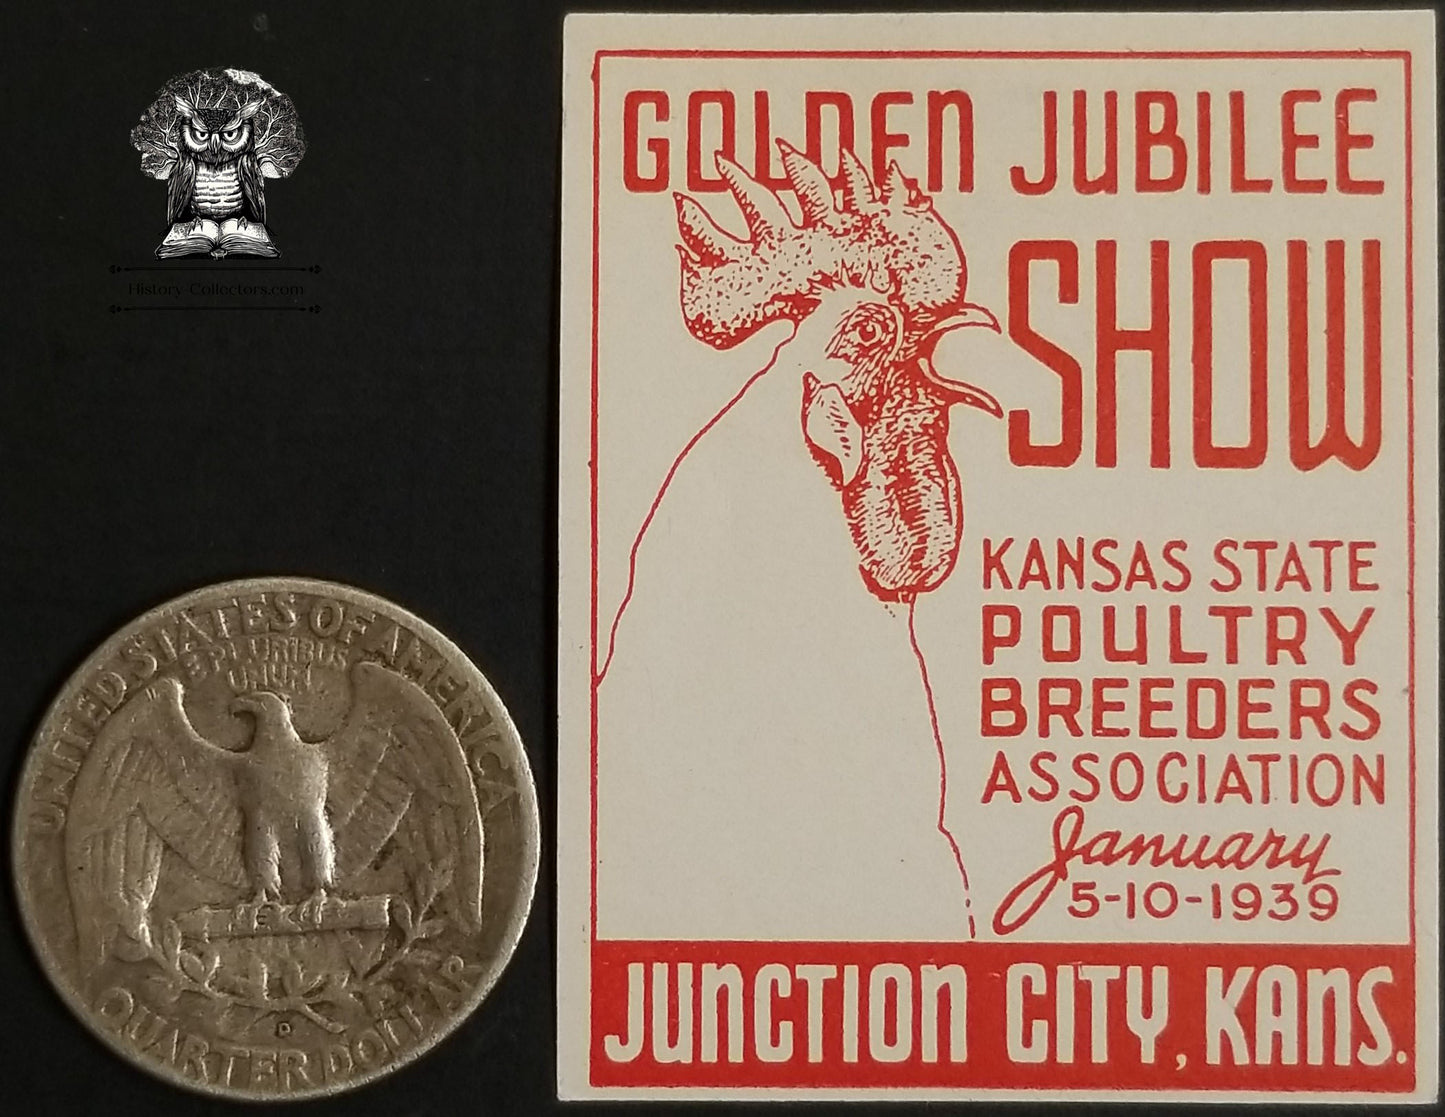 1939 Kansas State Poultry Breeders Association Golden Jubilee Show Exhibition Advertising Graphic - Junction City KS